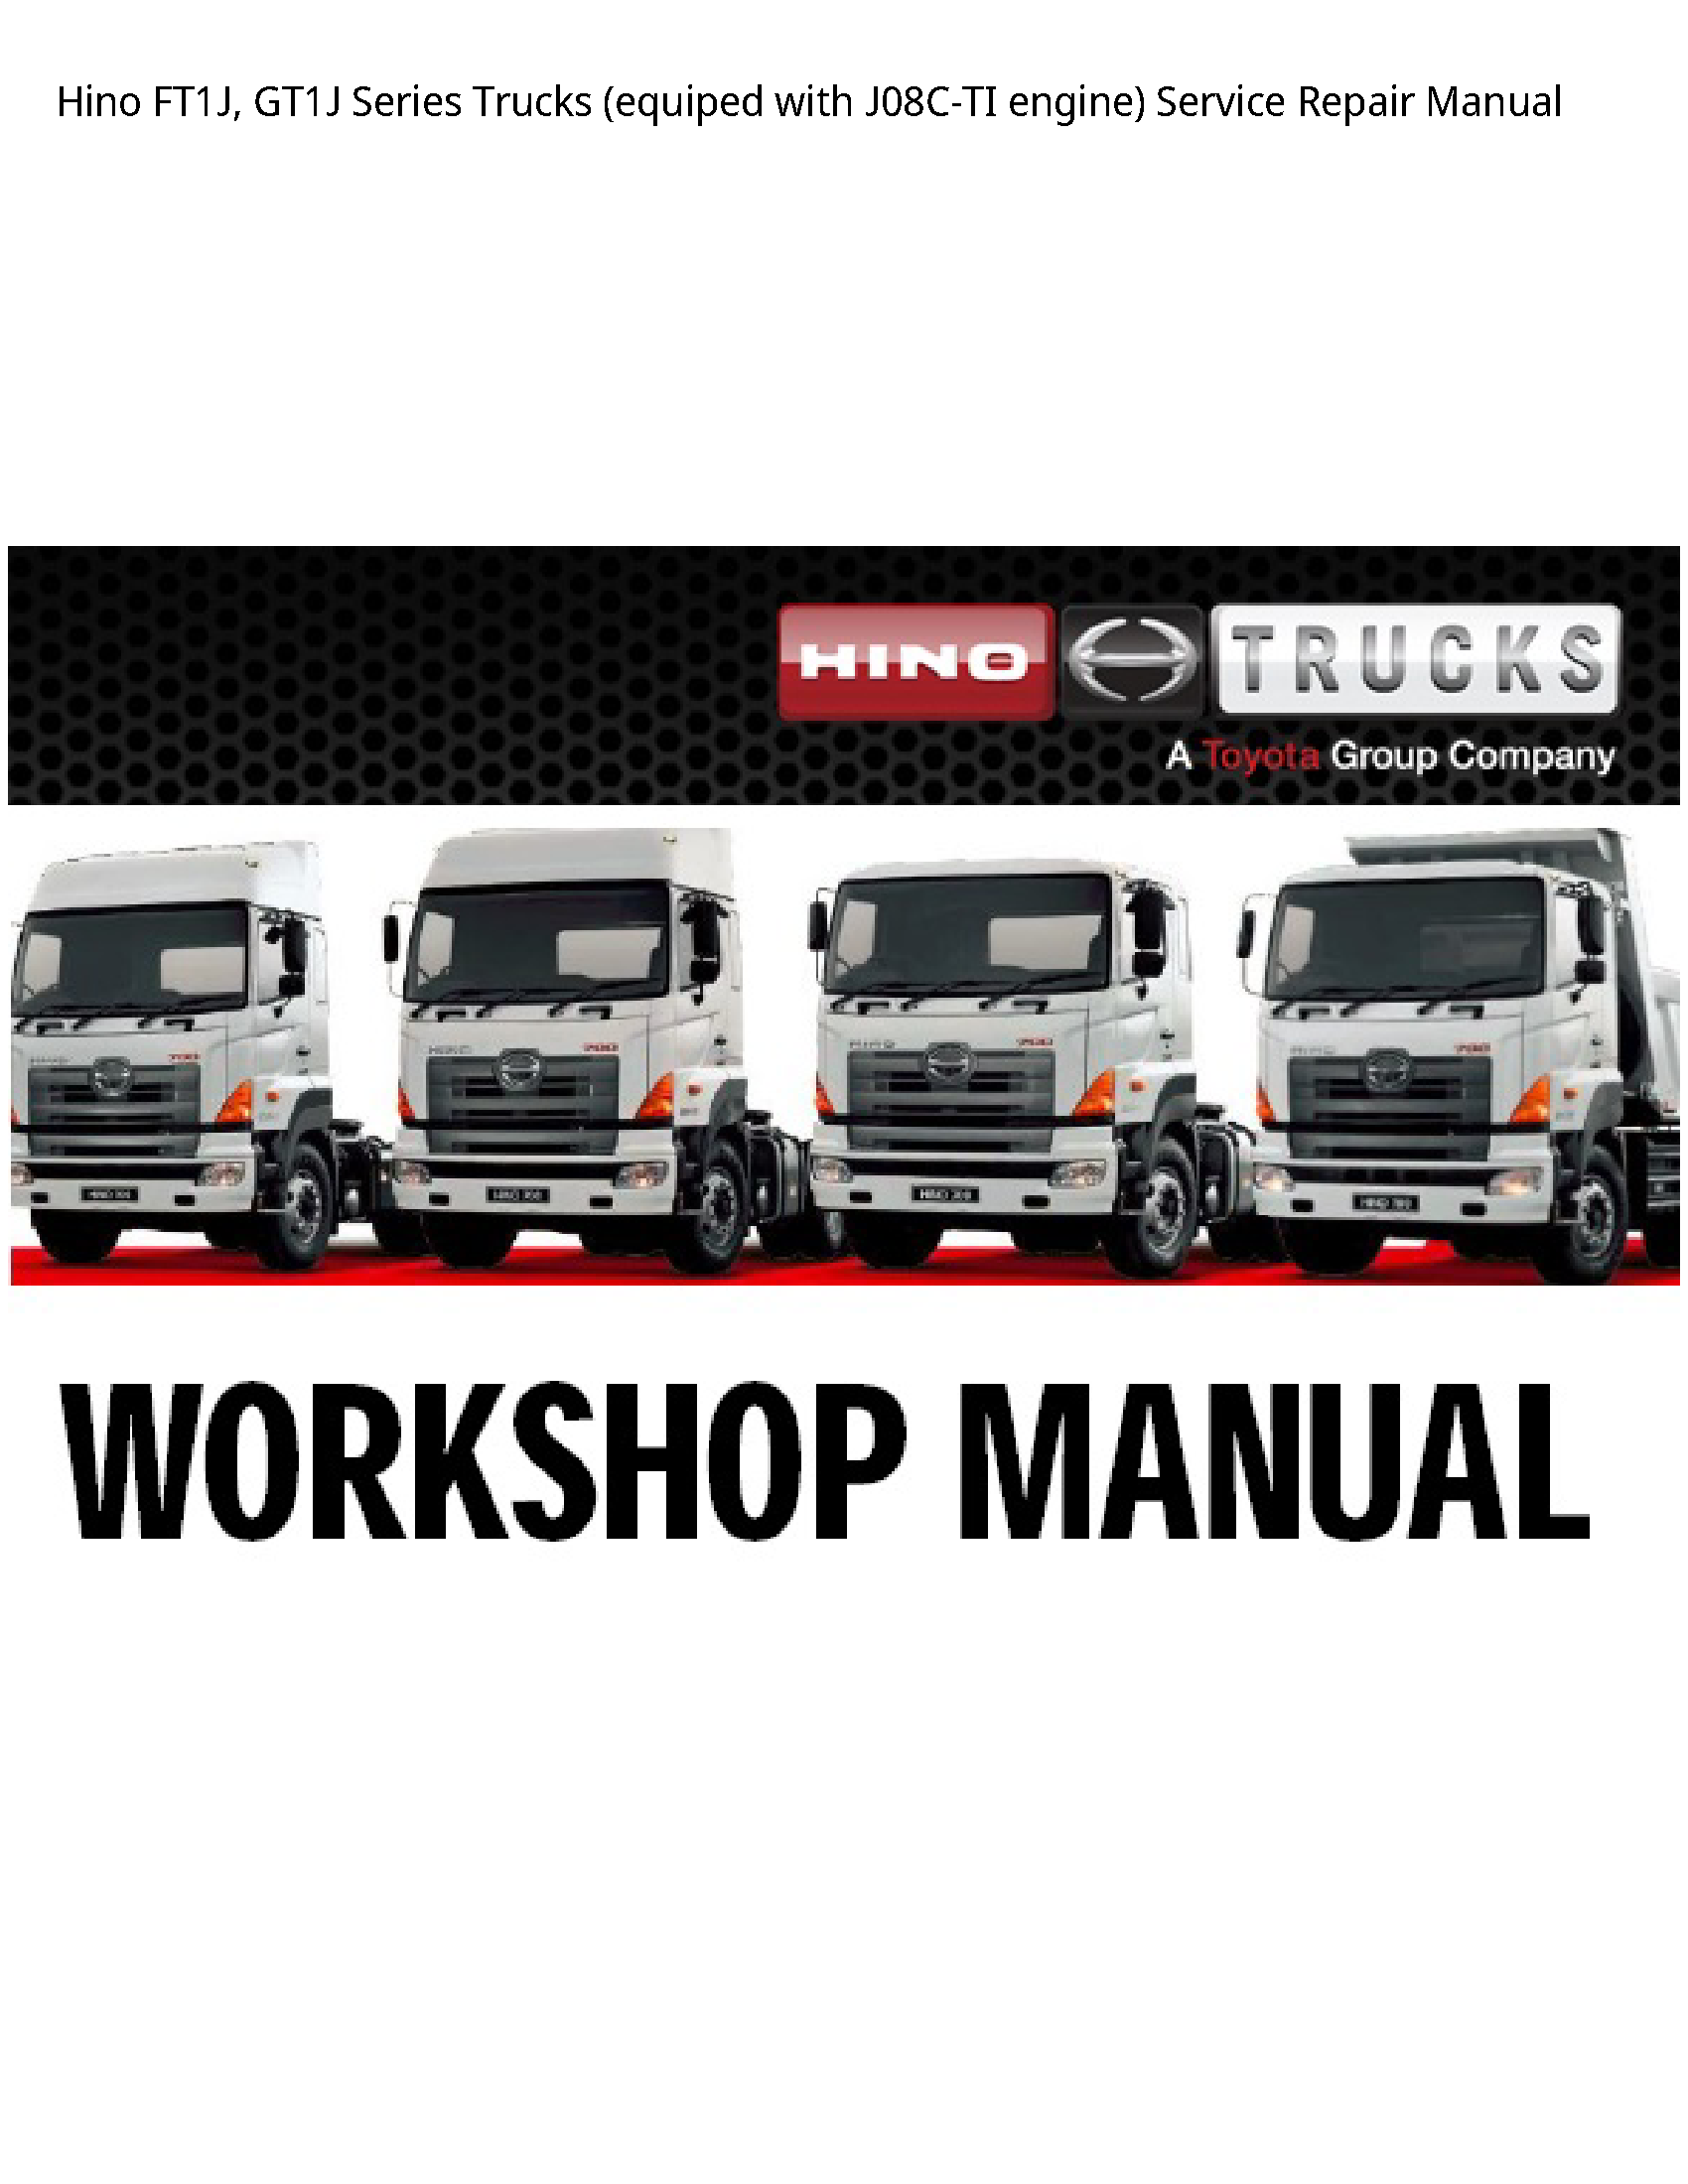 Hino FT1J Series Trucks equiped with engine manual